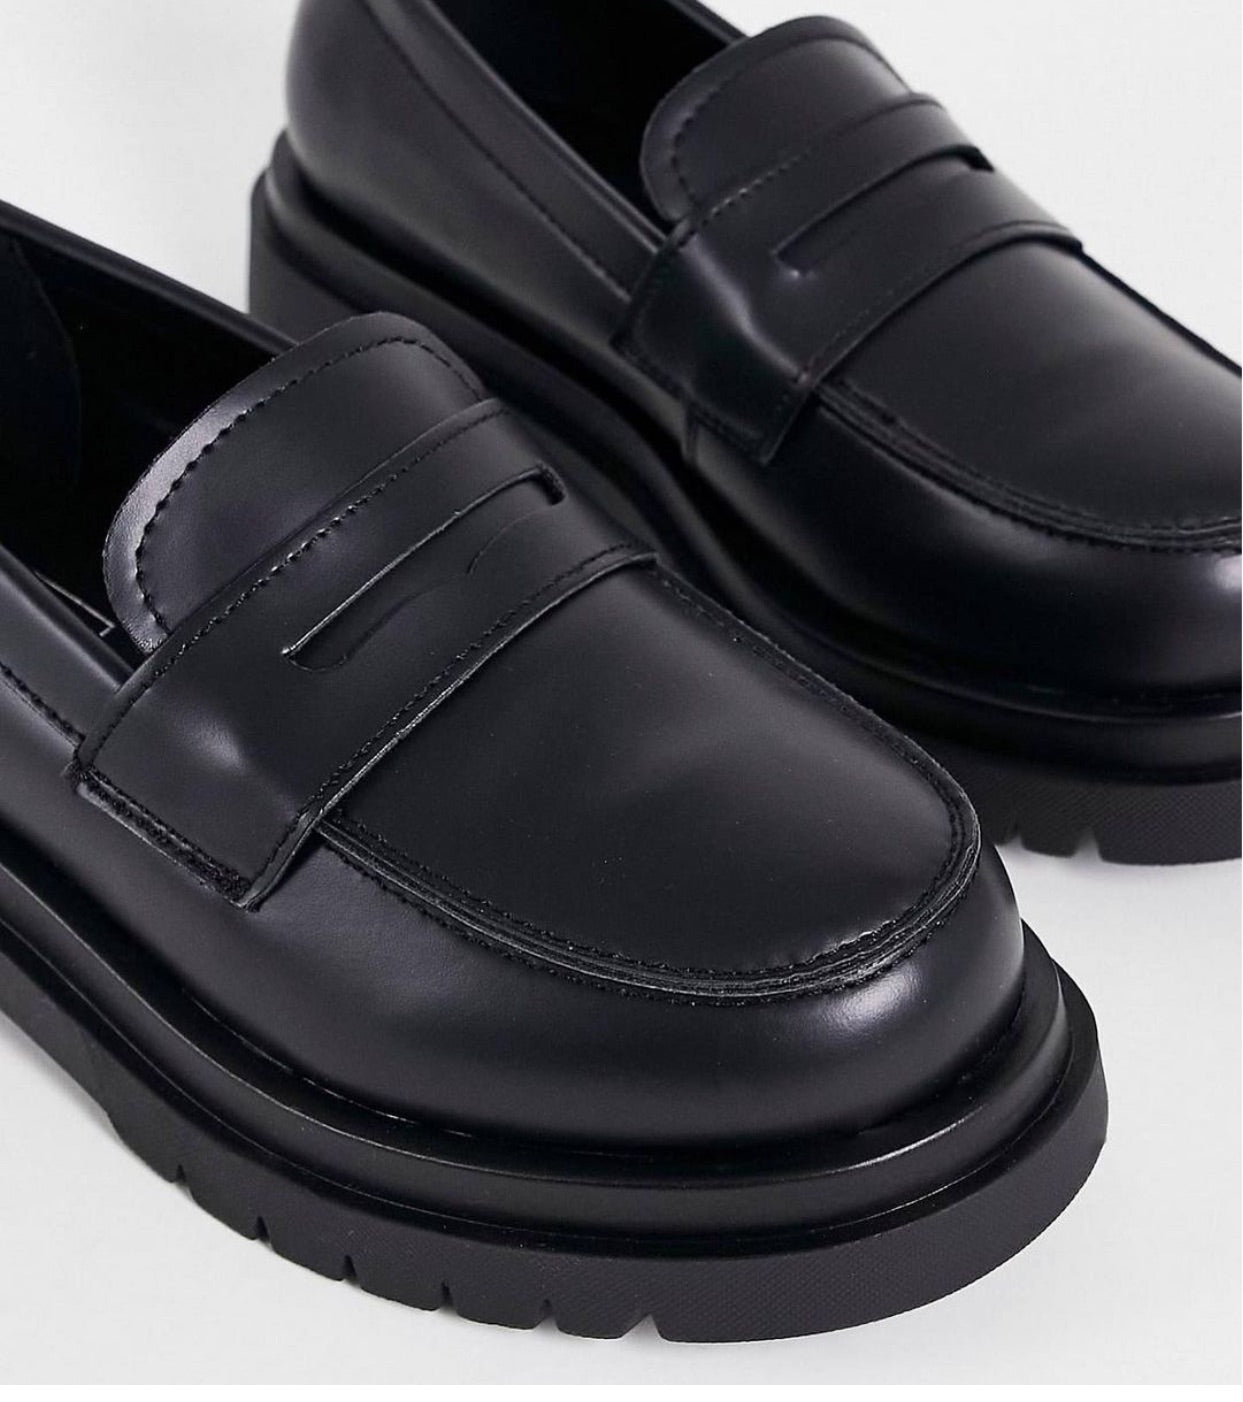 Truffle collection wide chunky loafers in black